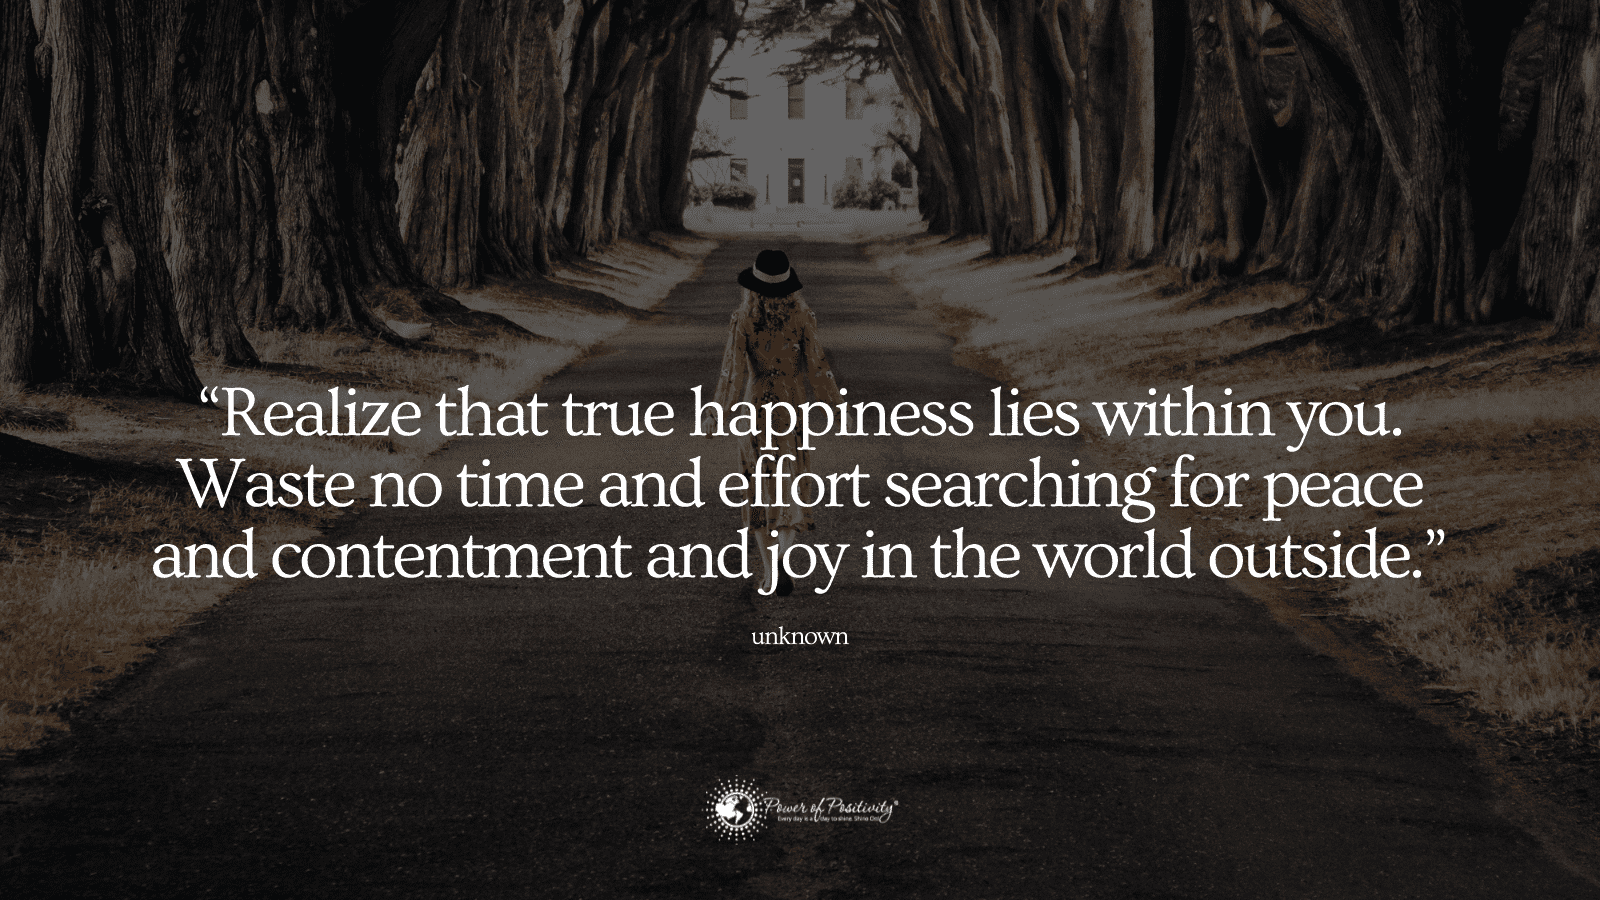 15 Contentment Quotes to Remember When You’re Down